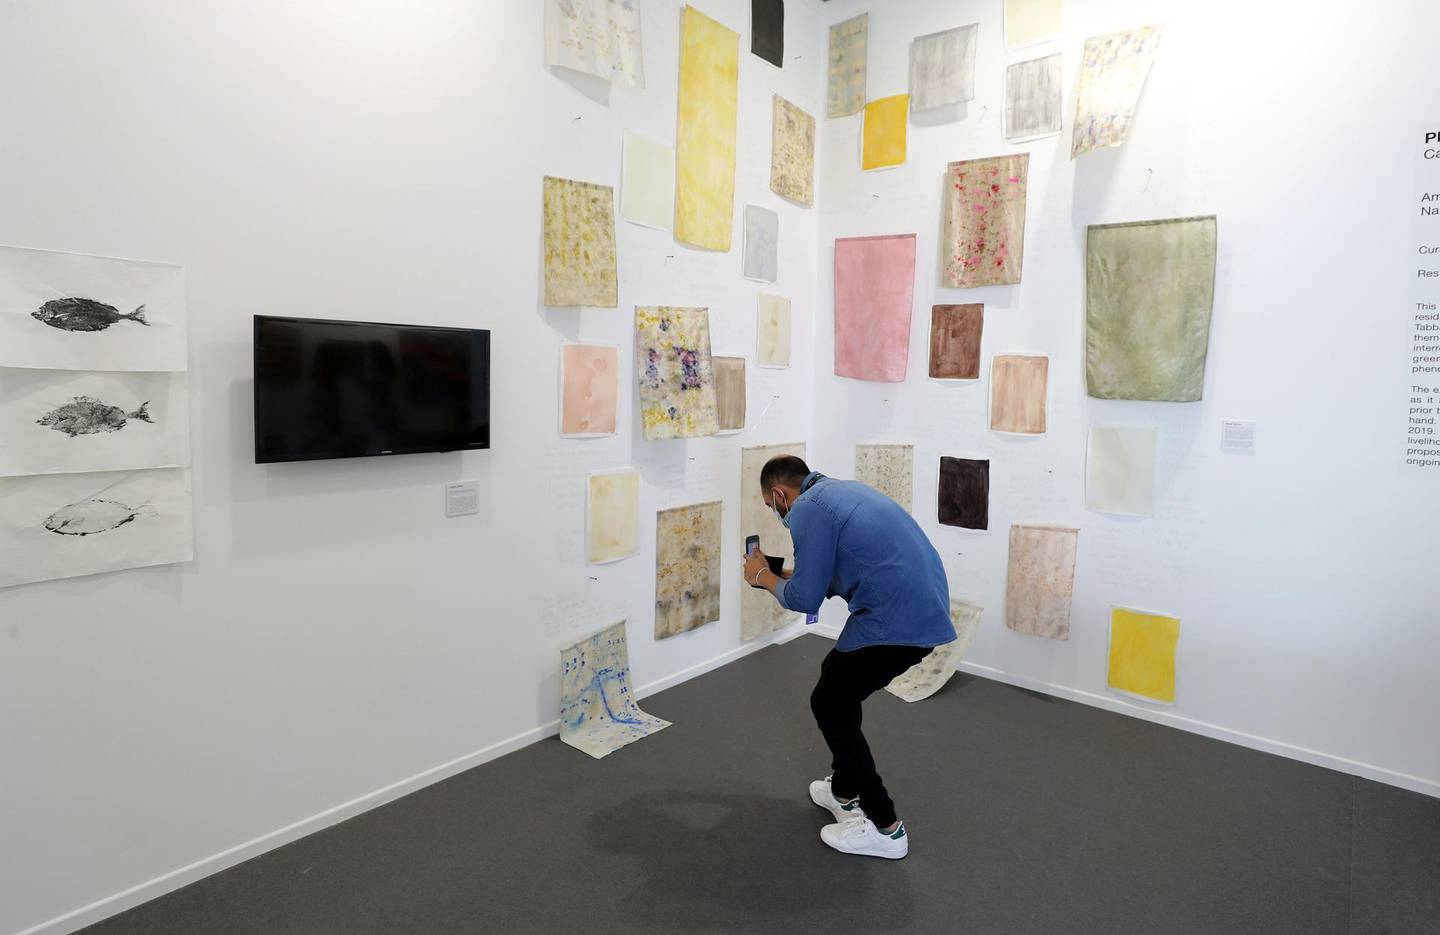 Dubai, United Arab Emirates - Reporter: Alexandra Chaves. Arts and Lifestyle. Fleeting Stains by Nahla Tabbaa. Art Dubai 2021 opens at the DIFC. Tuesday, March 30th, 2021. Dubai. Chris Whiteoak / The National